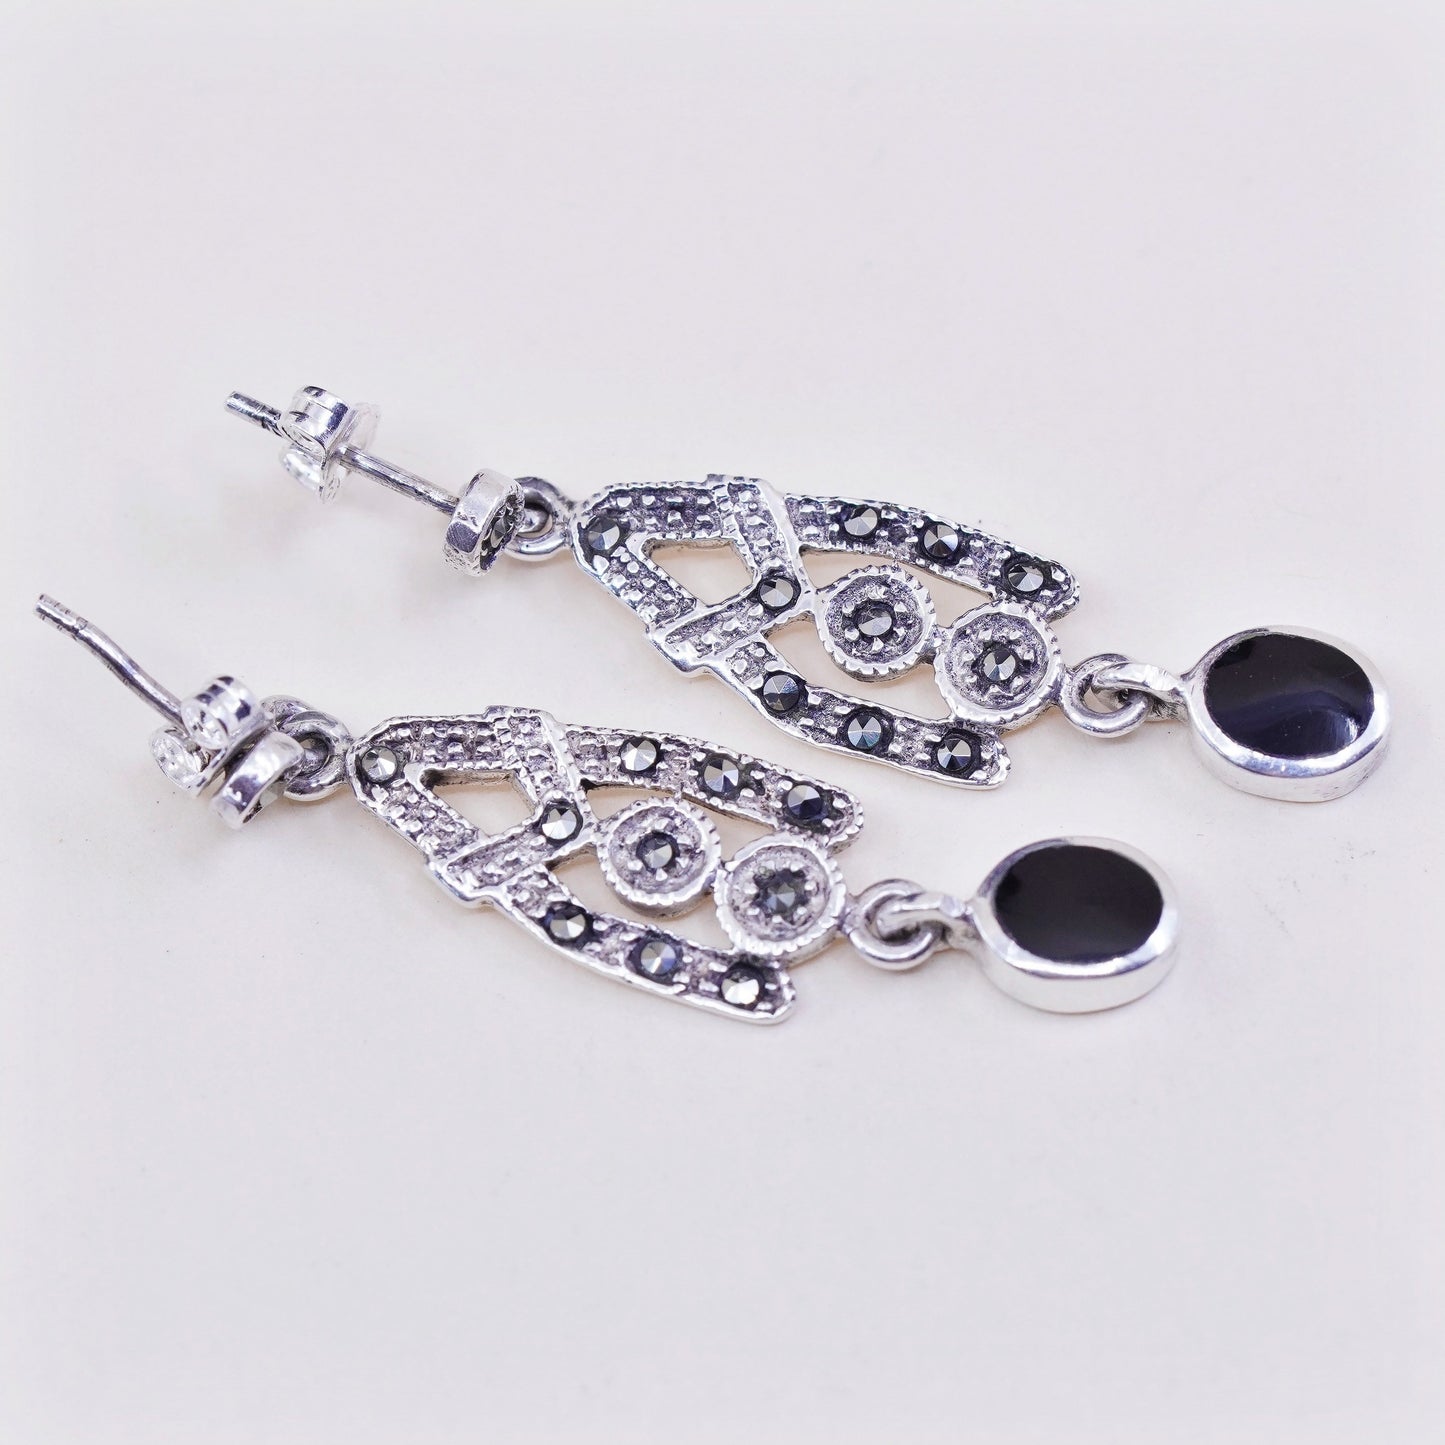 Vintage Sterling 925 silver handmade earrings with obsidian and marcasite